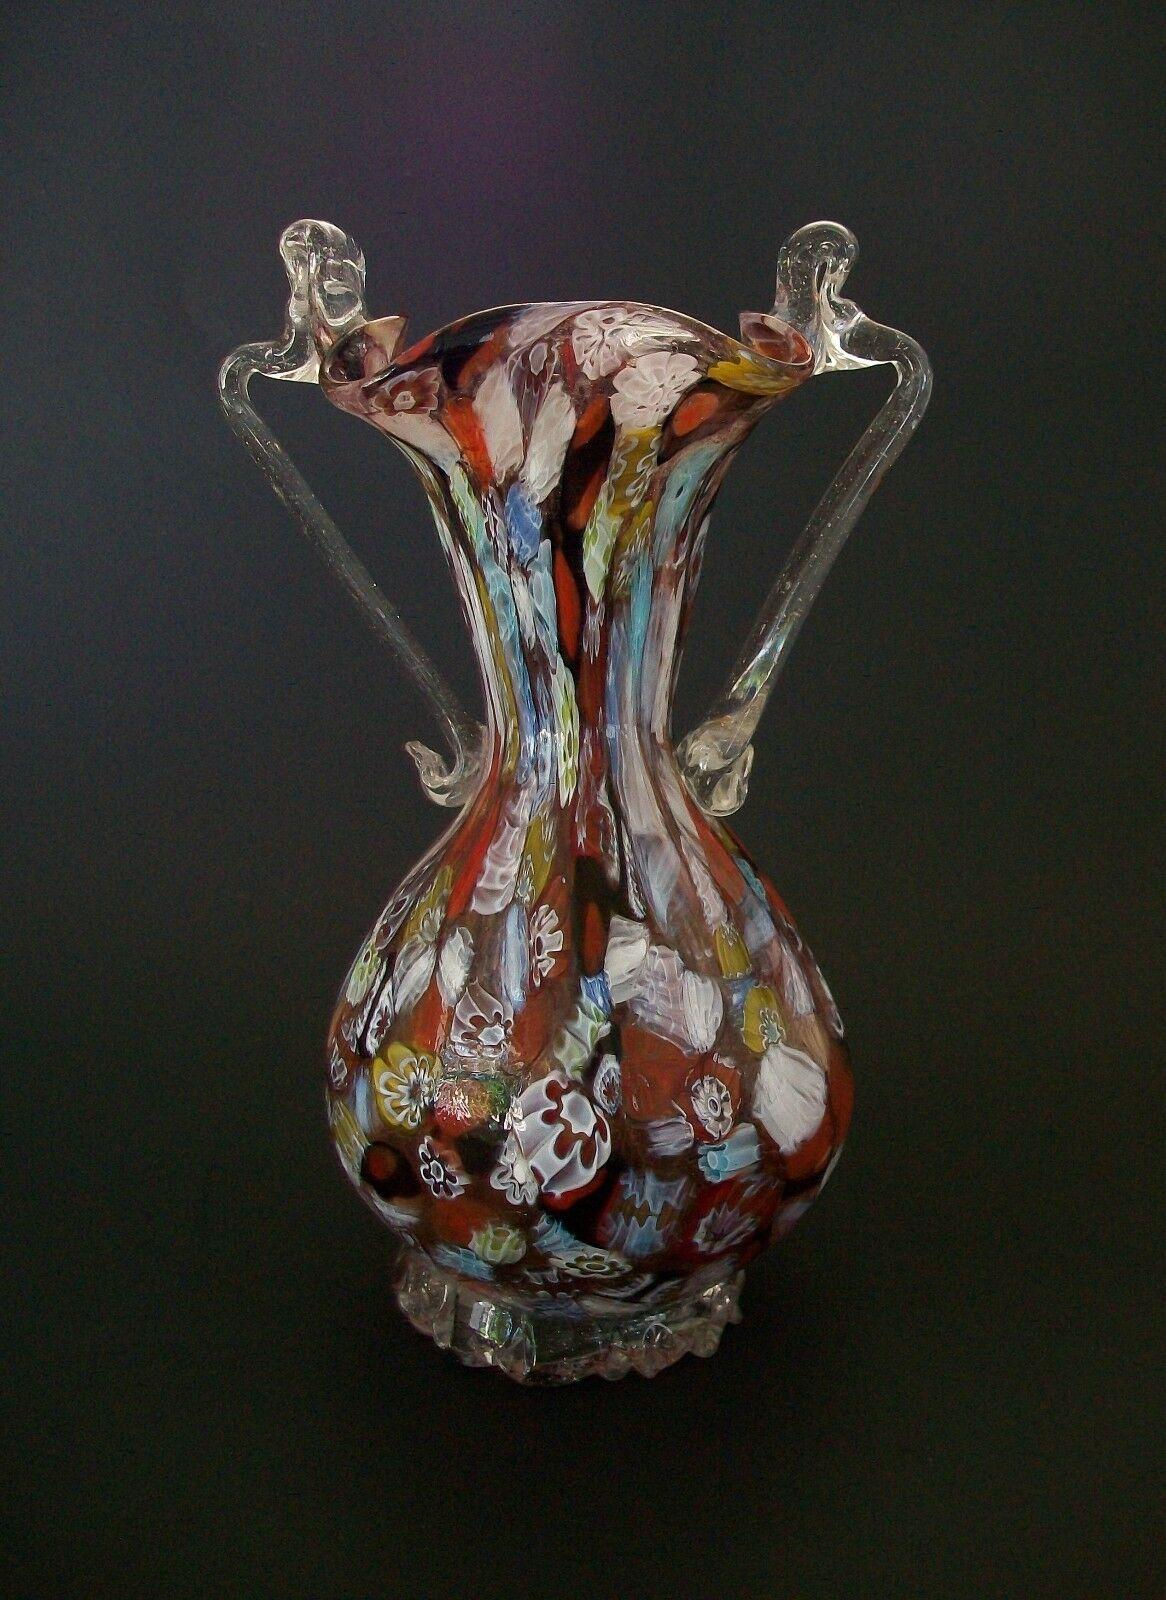 FRATELLI TOSO (Attributed) - Murano 'millefiori' glass vase - hand blown with clear 'bubble' glass handles and crimped foot rim - unsigned - Italy - circa 1950's.

Excellent vintage condition - no loss - no damage - no restoration - residue/grime to